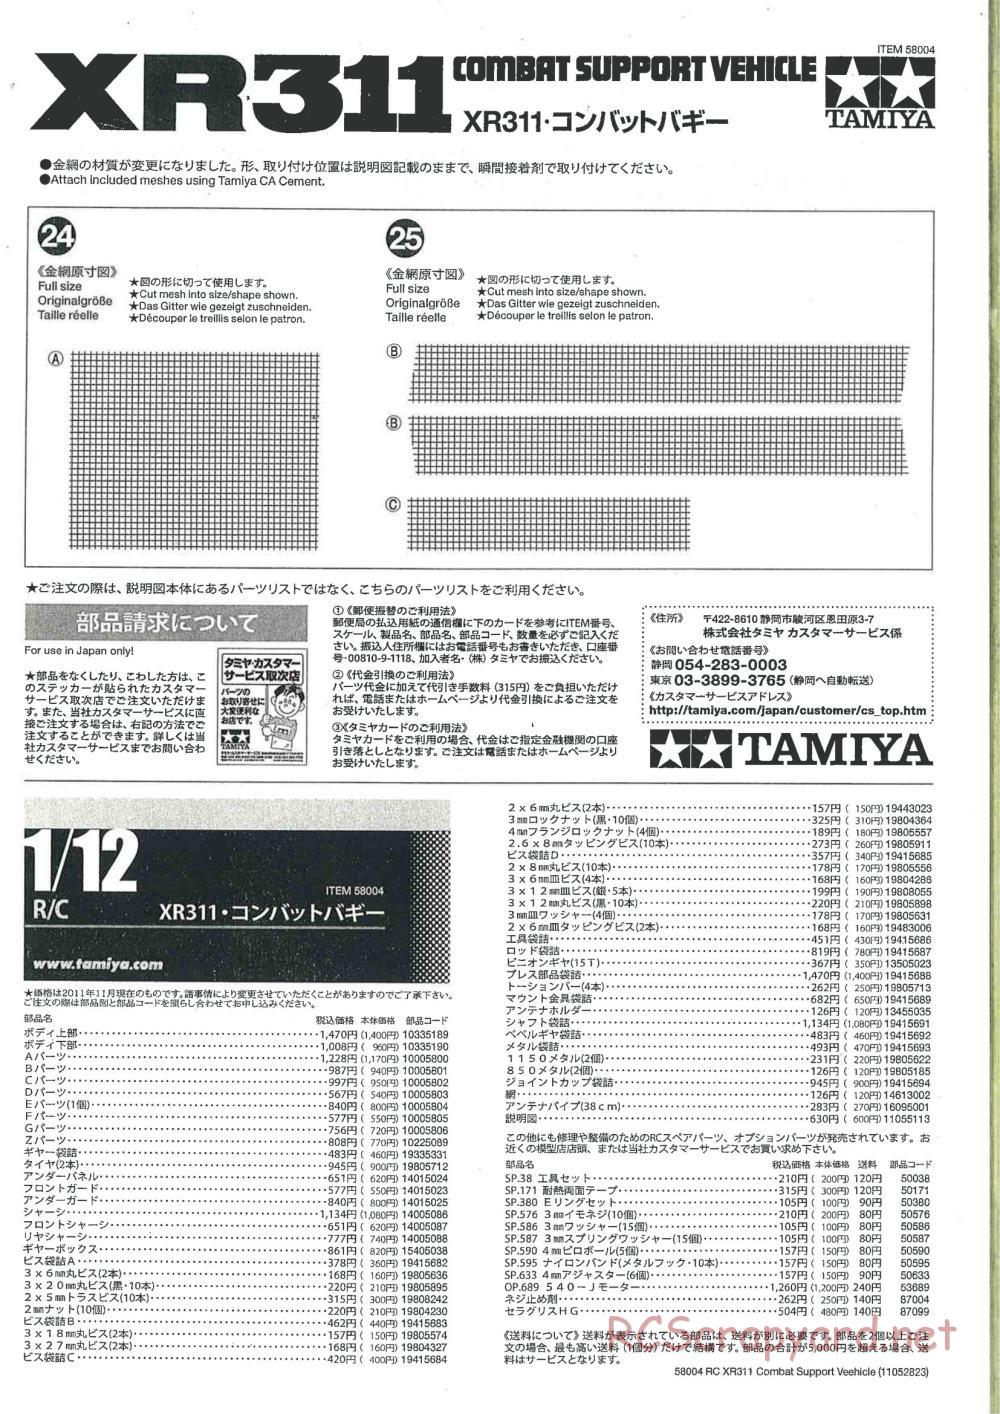 Tamiya - XR311 Combat Support Vehicle (2012) Chassis - Manual - Page 21